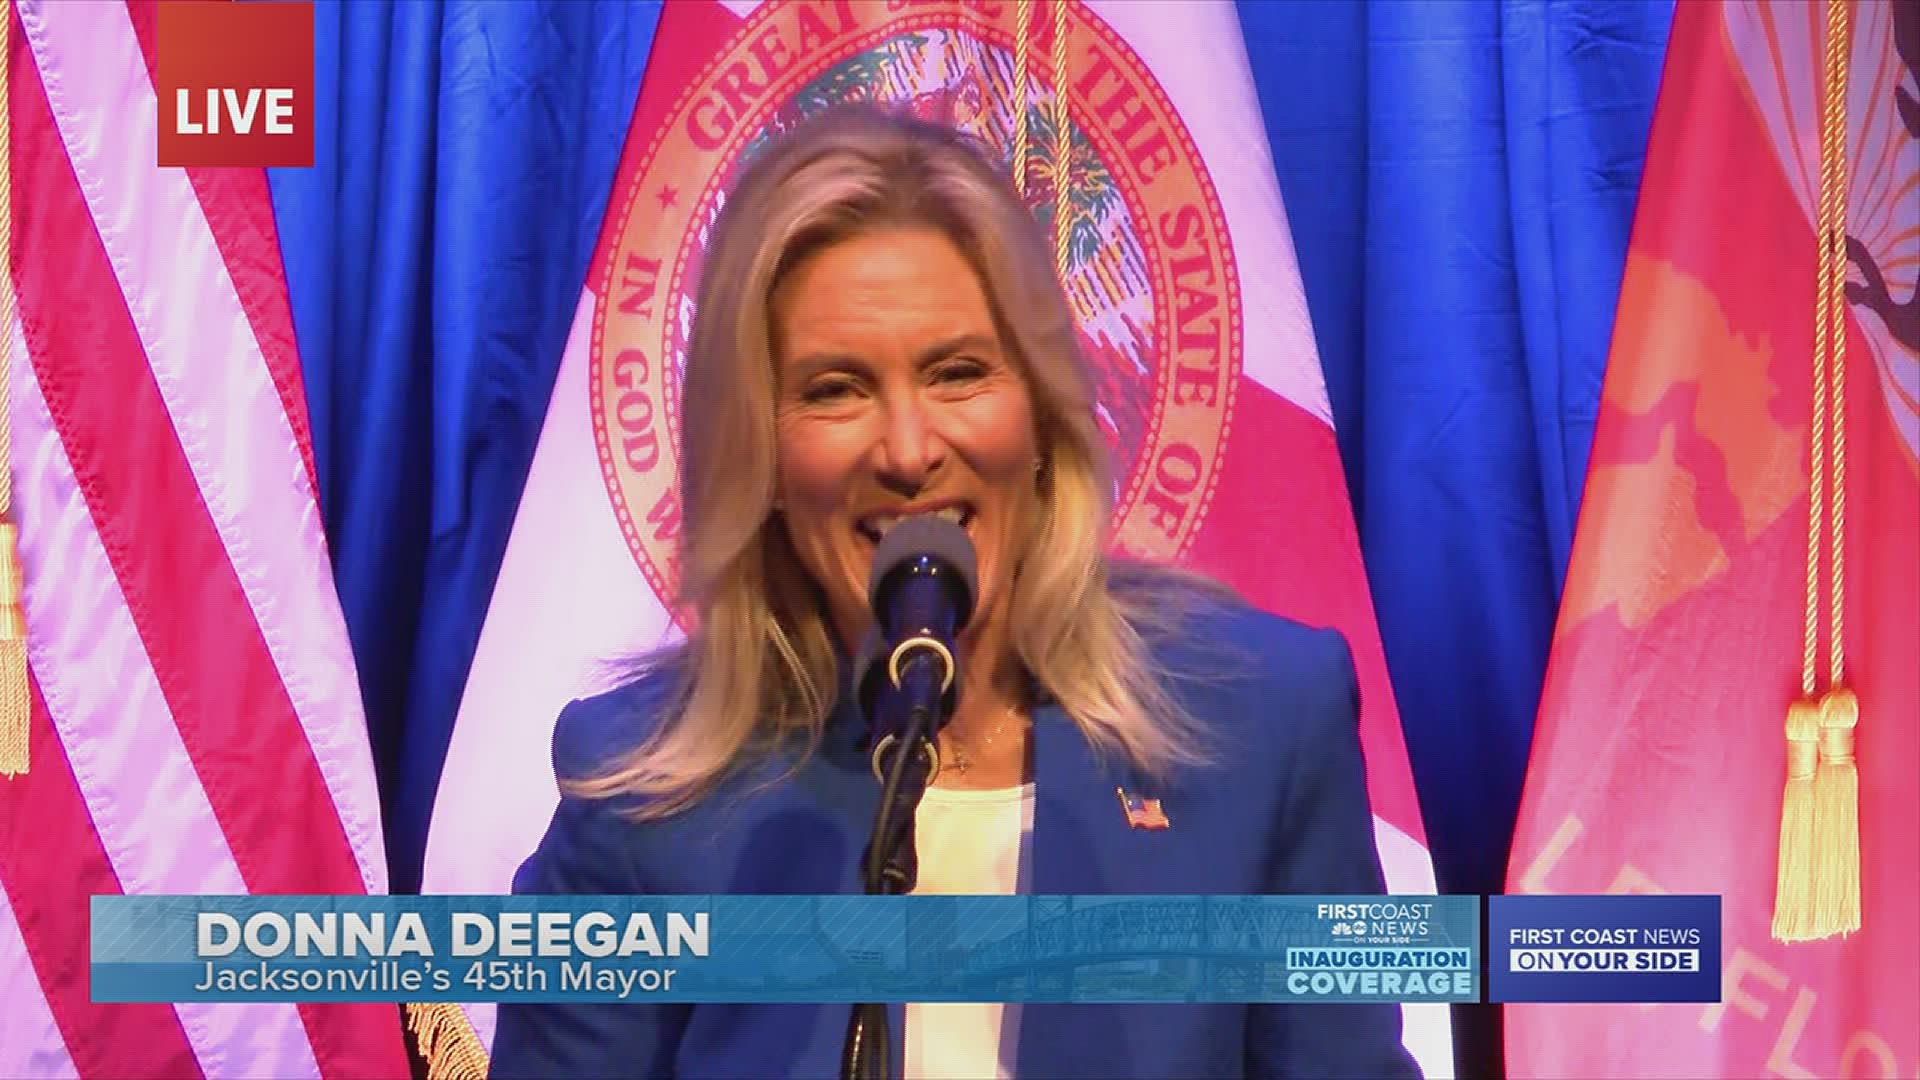 Mayor Donna Deegan was sworn in Saturday during a historic inauguration in becoming the city of Jacksonville's first woman mayor.